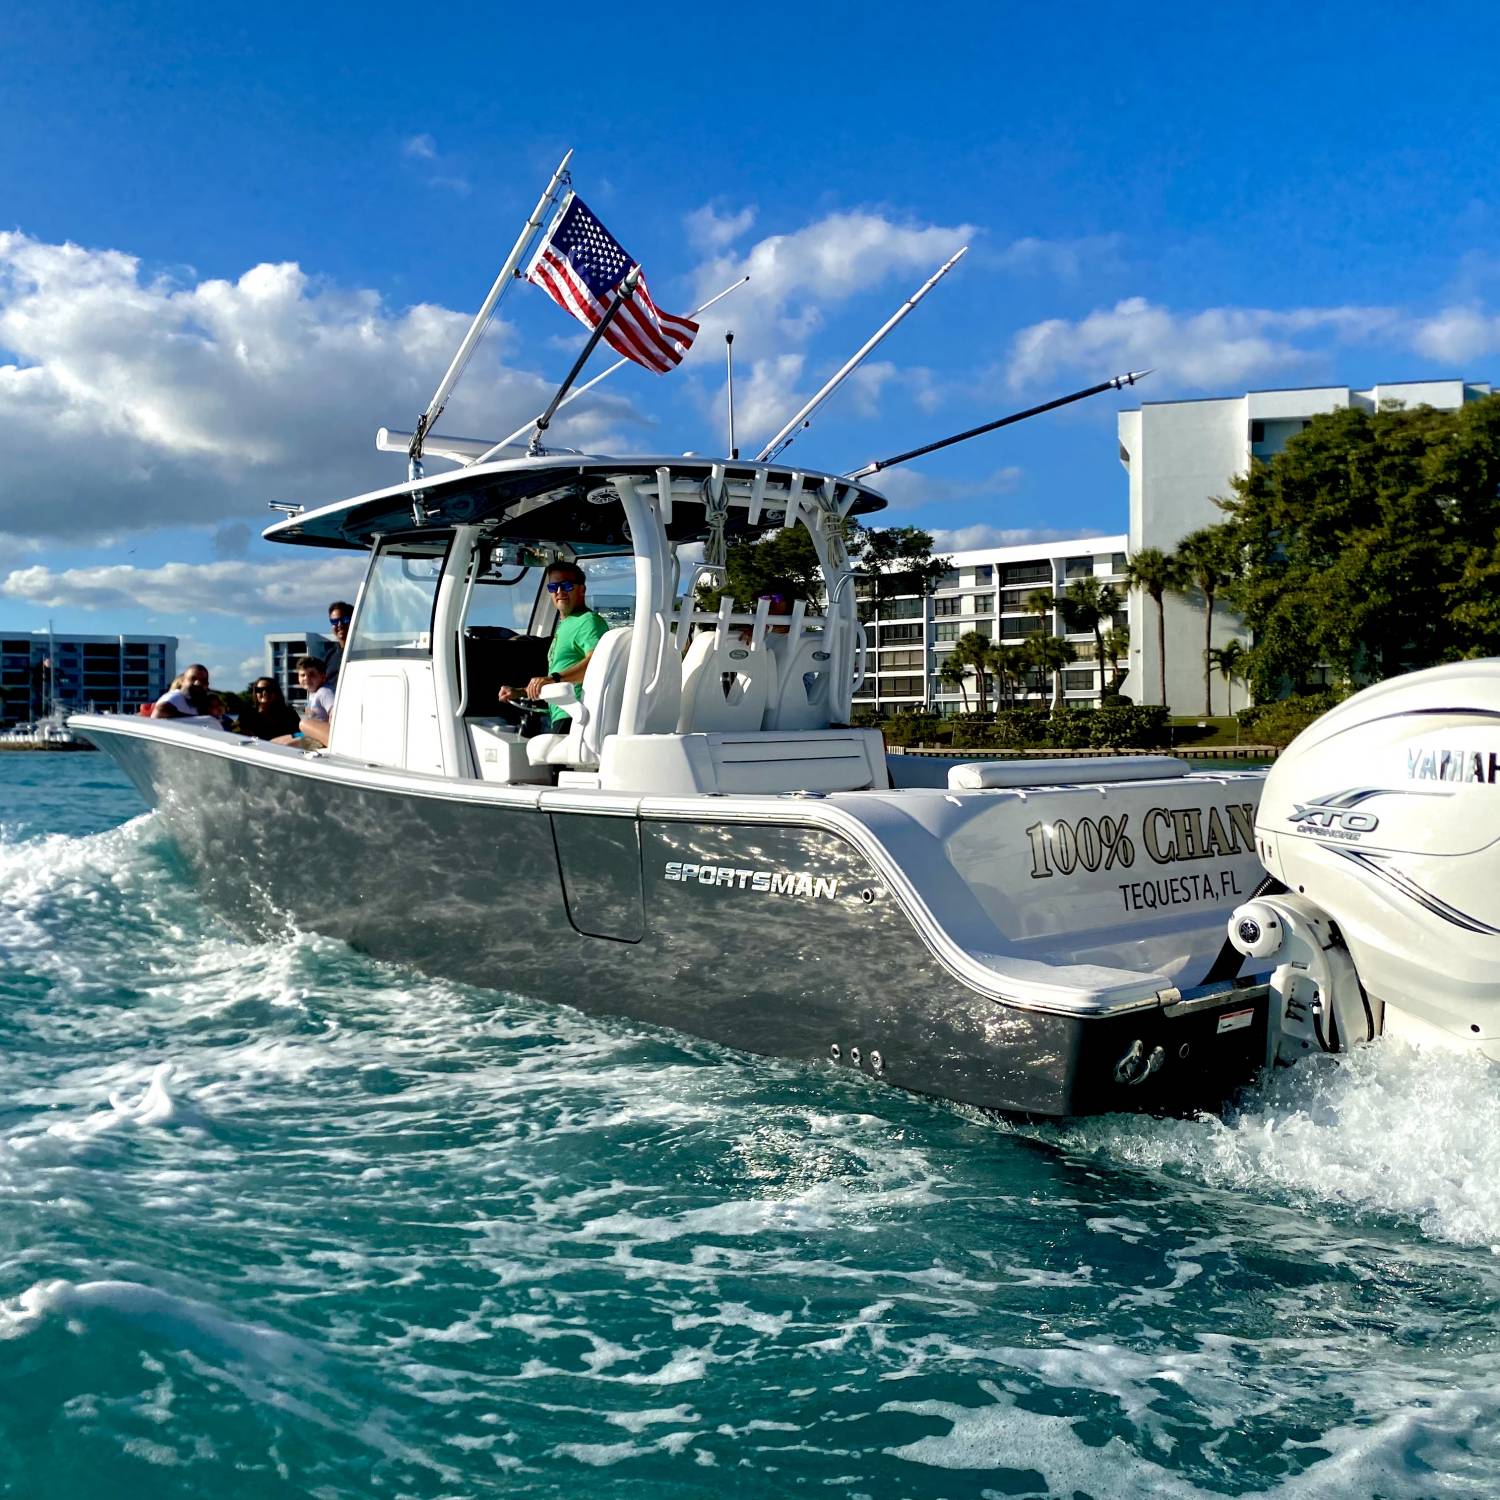 Title: 100% CHANCE - On board their Sportsman Open 352 Center Console - Location: Jupiter FL. Participating in the Photo Contest #SportsmanJanuary2022